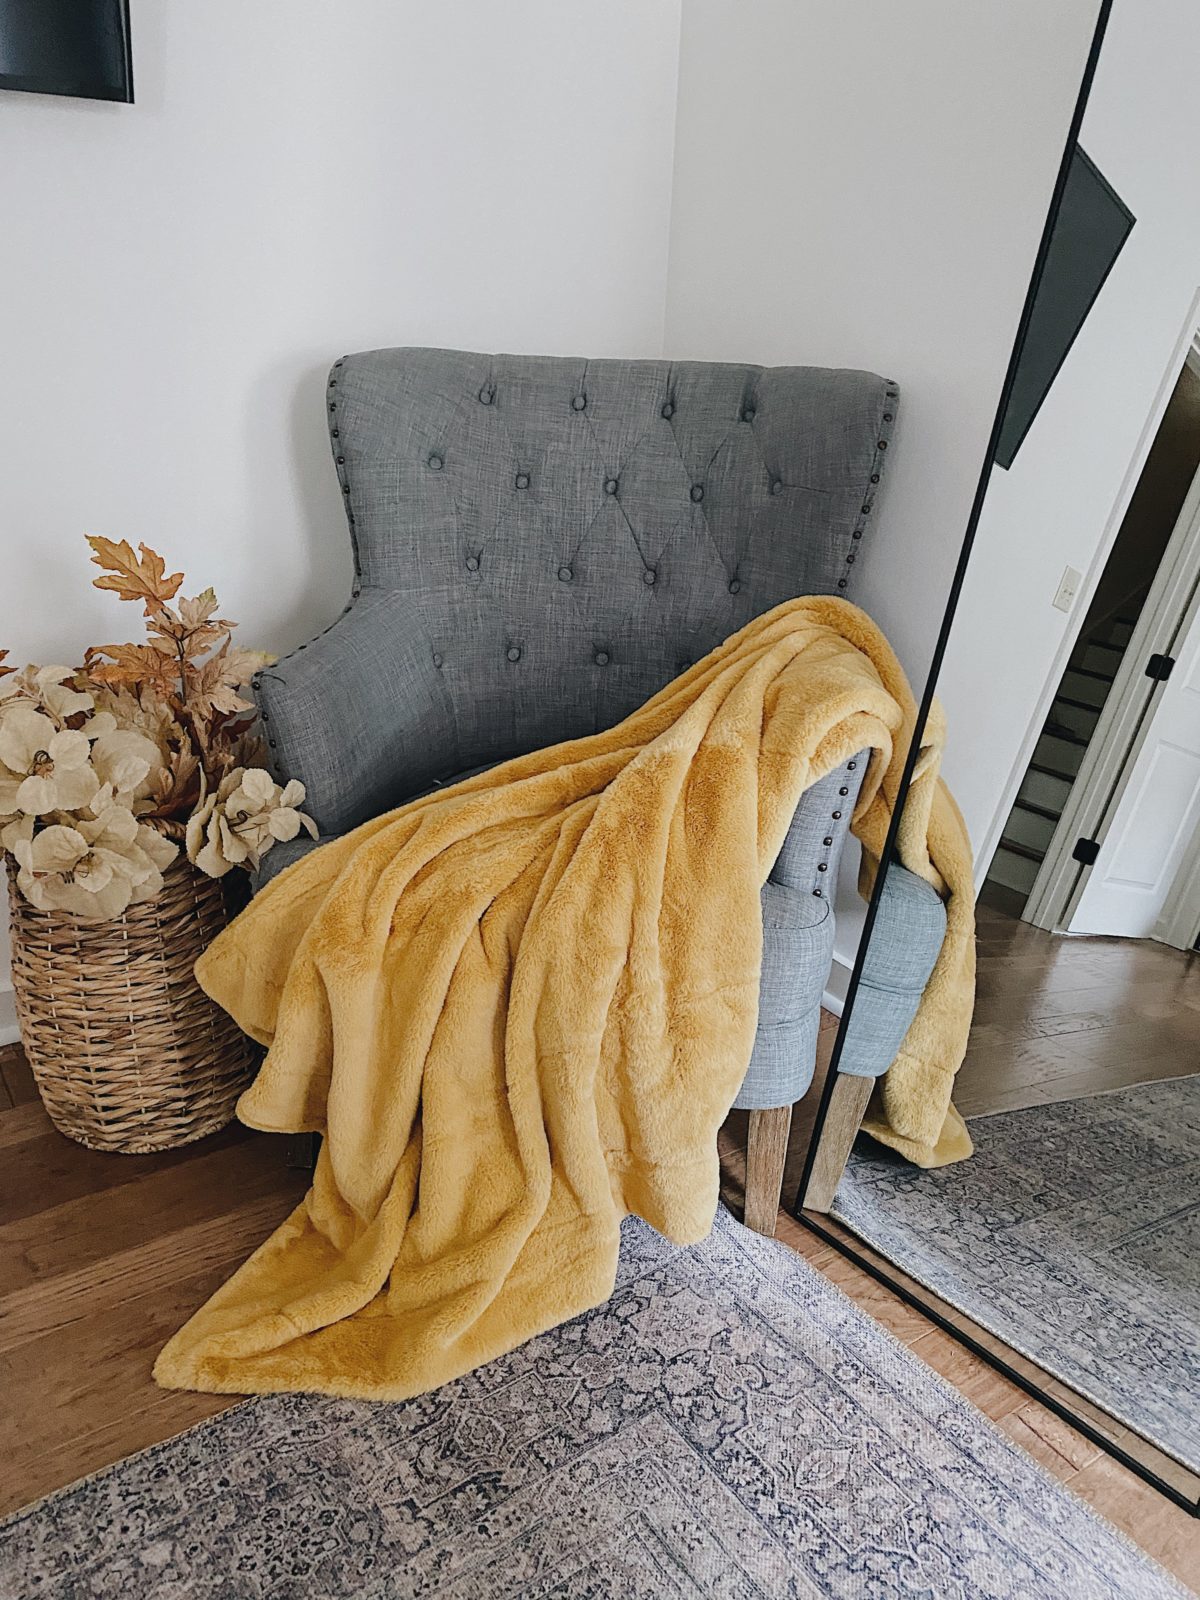 5 Ways to Make your Home Cozy on a Budget, tips featured by top AL home blogger, She Gave It A Go